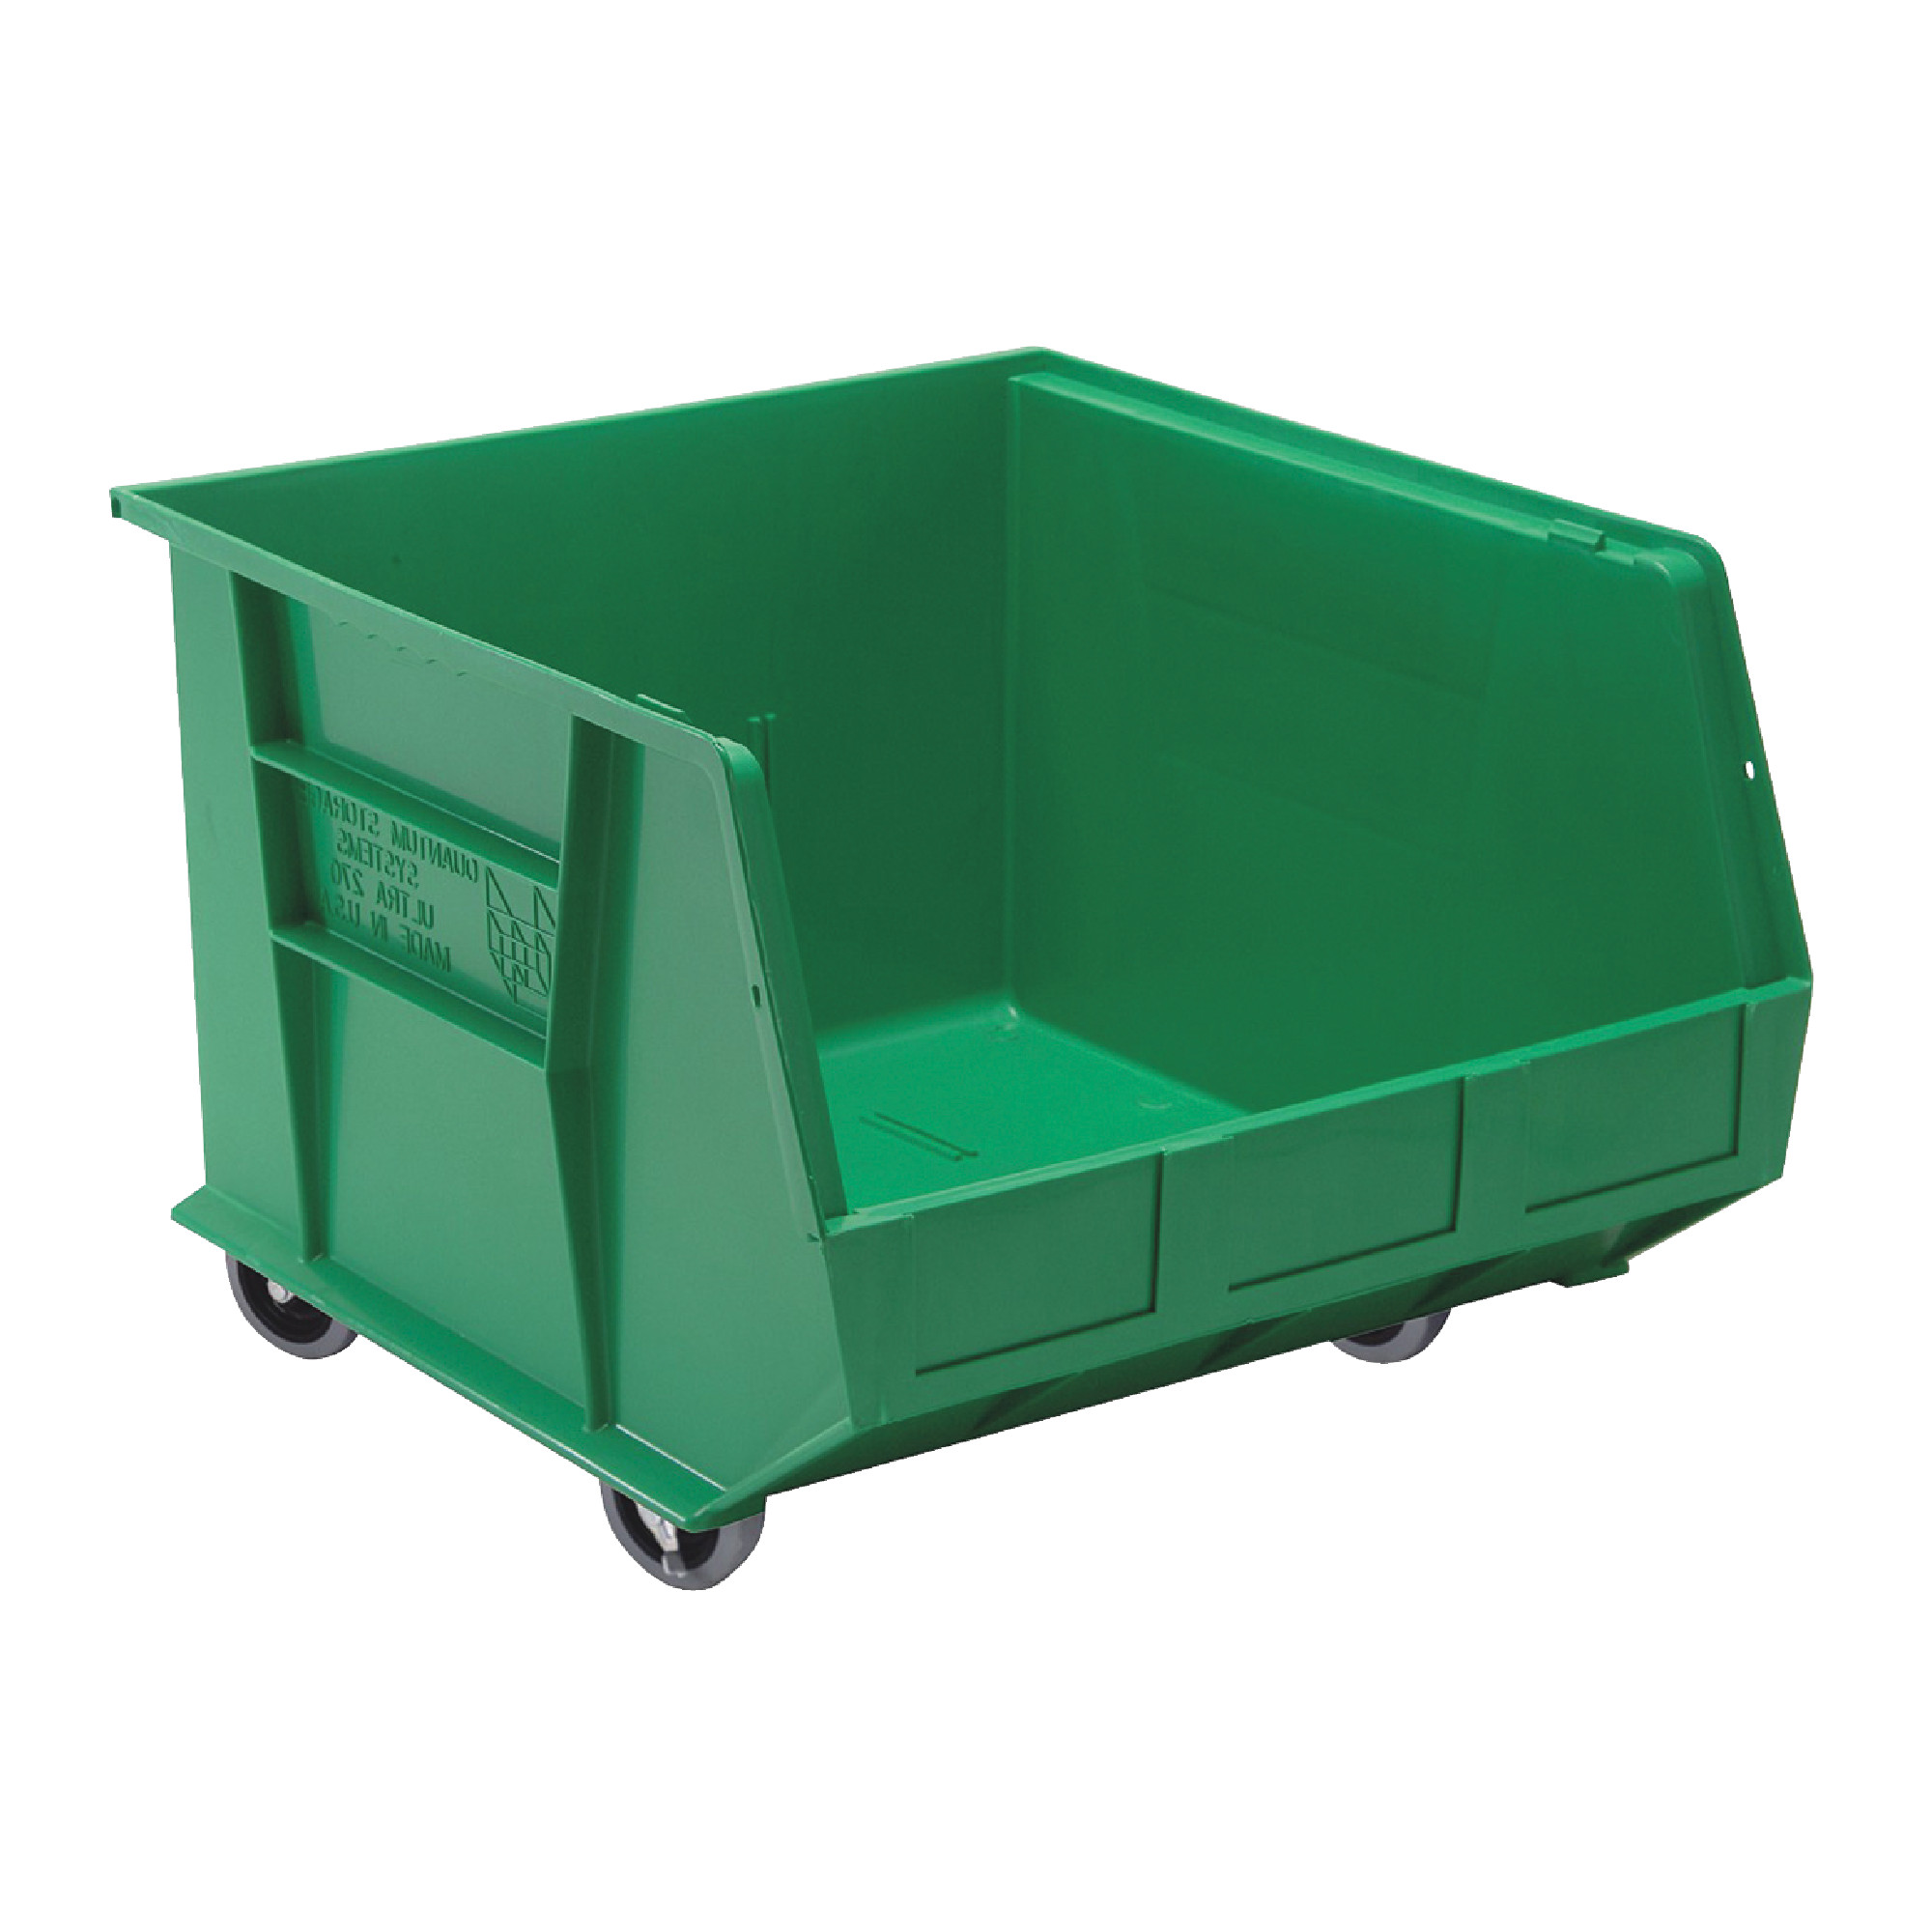 QUANTUM STORAGE SYSTEMS 18" x 16-1/2" x 11" Green Ultra Stanck & Hang Mobile Bins - 3/Pack